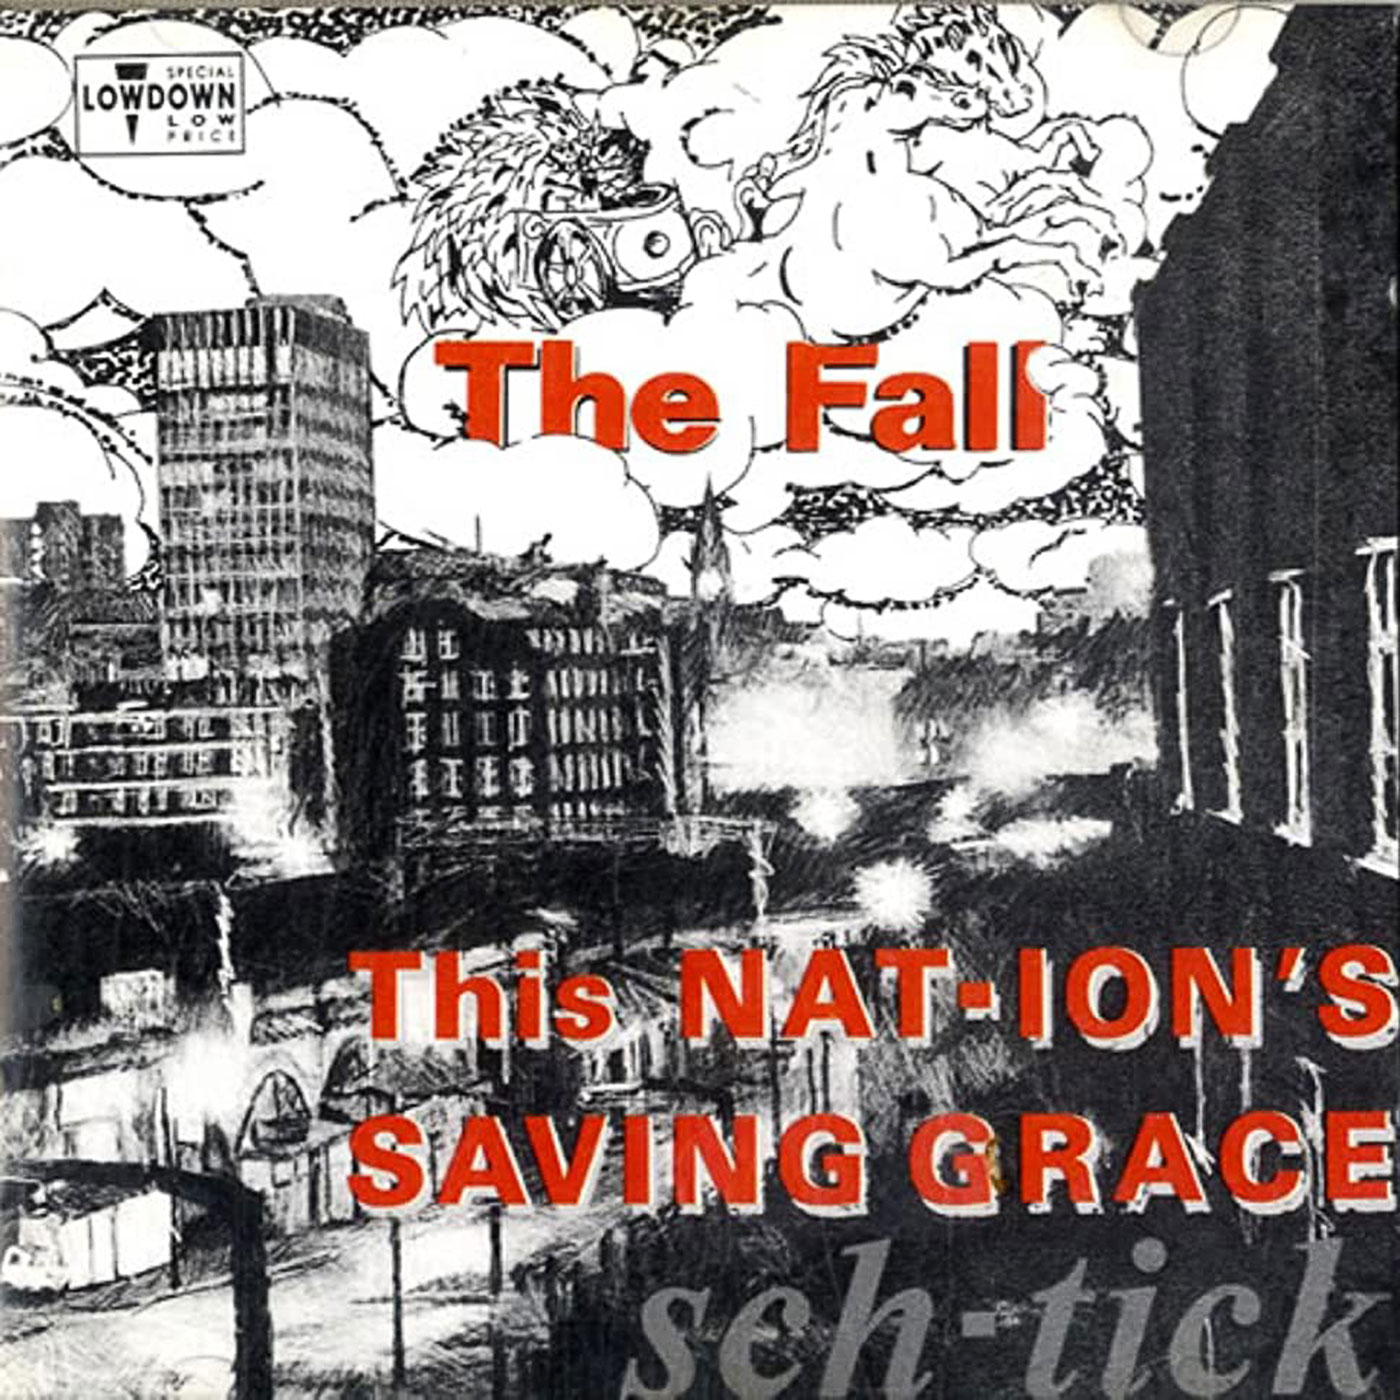 547 The Fall – This Nation’s Saving Grace